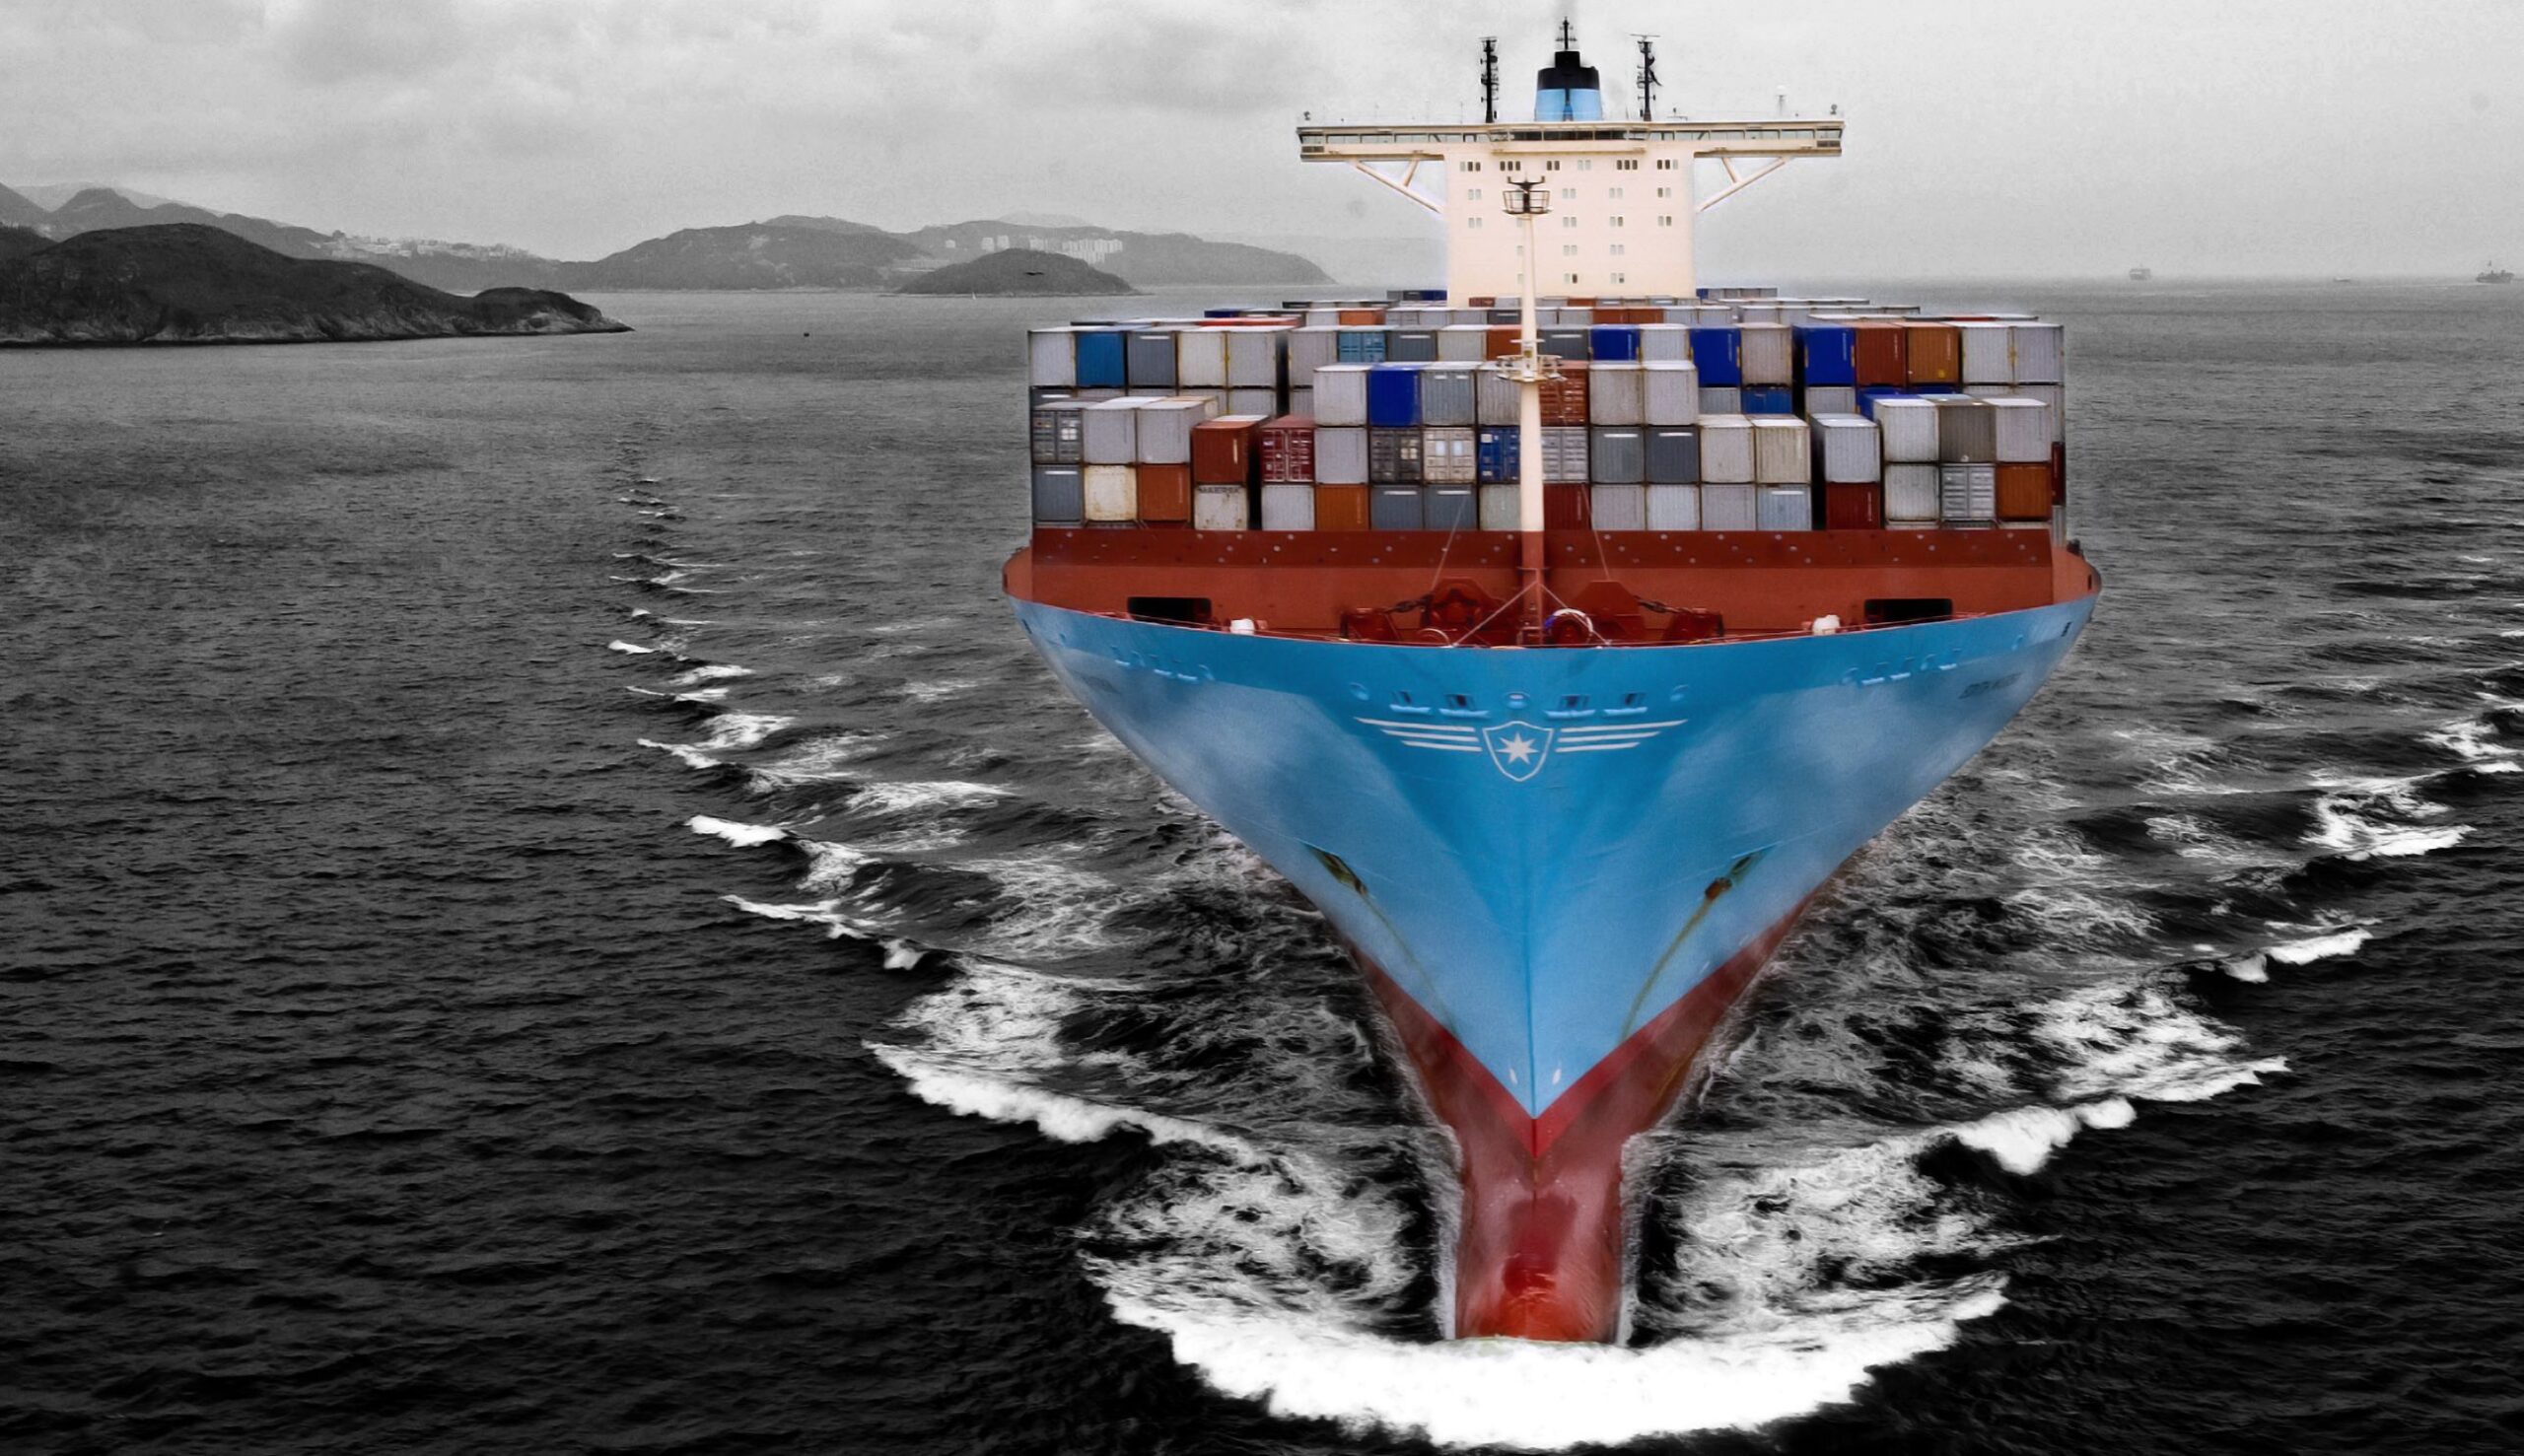 HD image of the container ship Maersk line photo of the great vessel ...